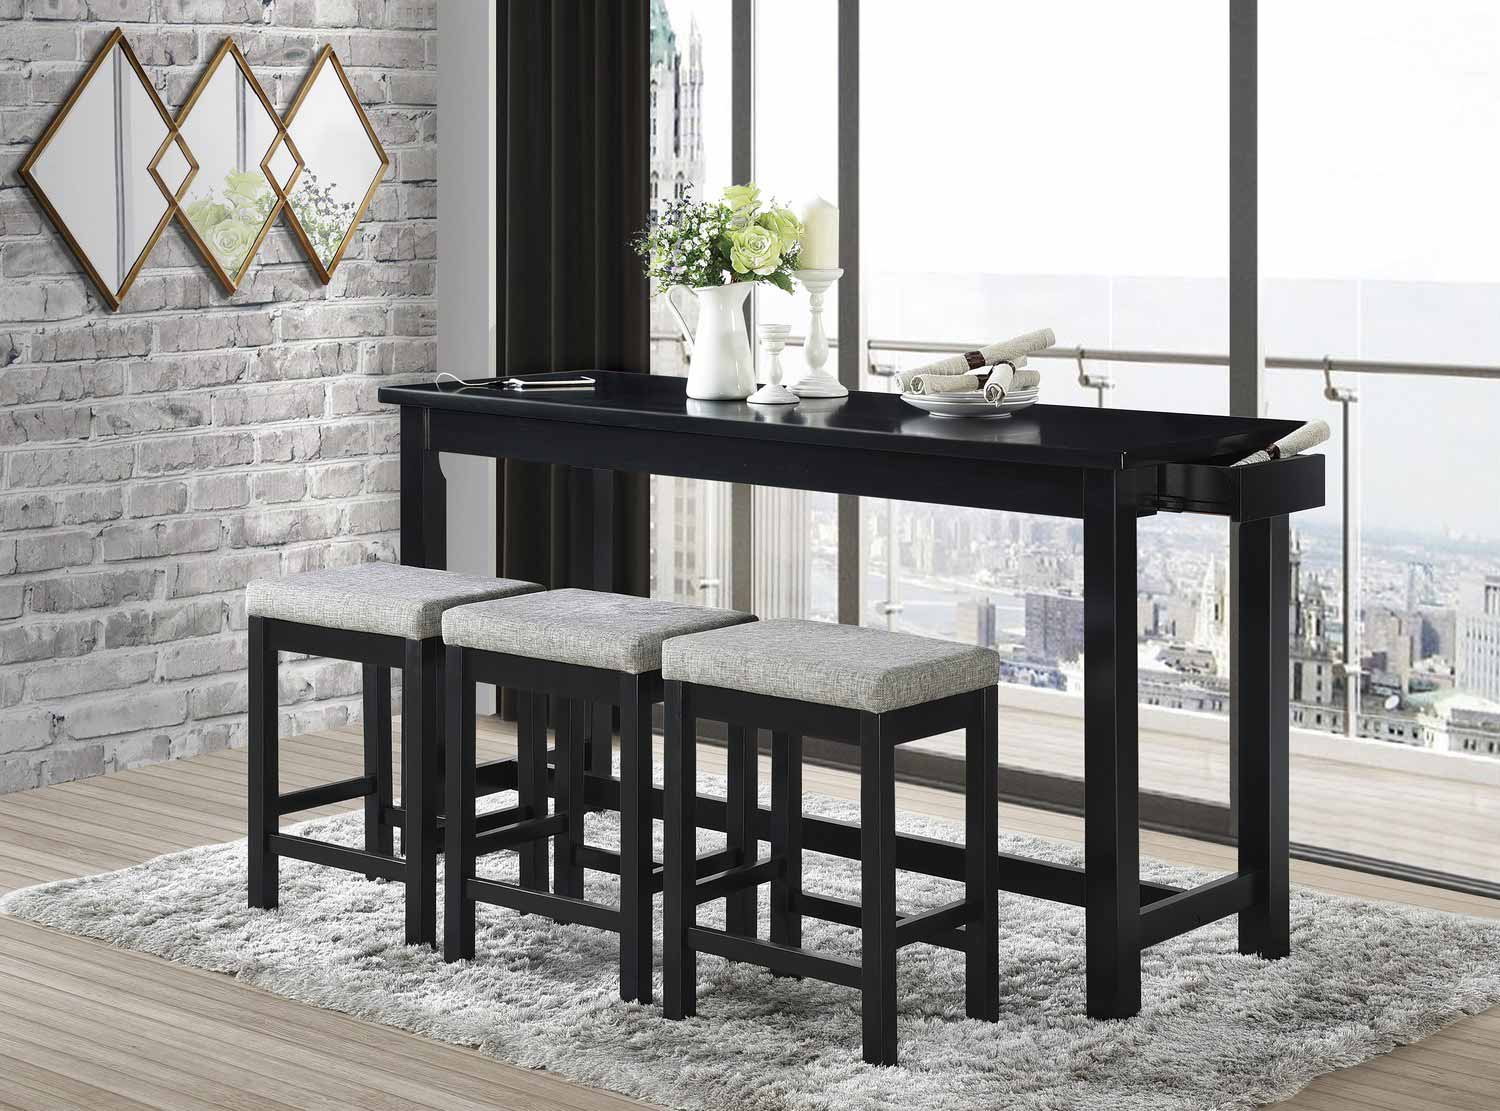 Homelegance Connected 4-Piece Pack Counter Height Set - Black